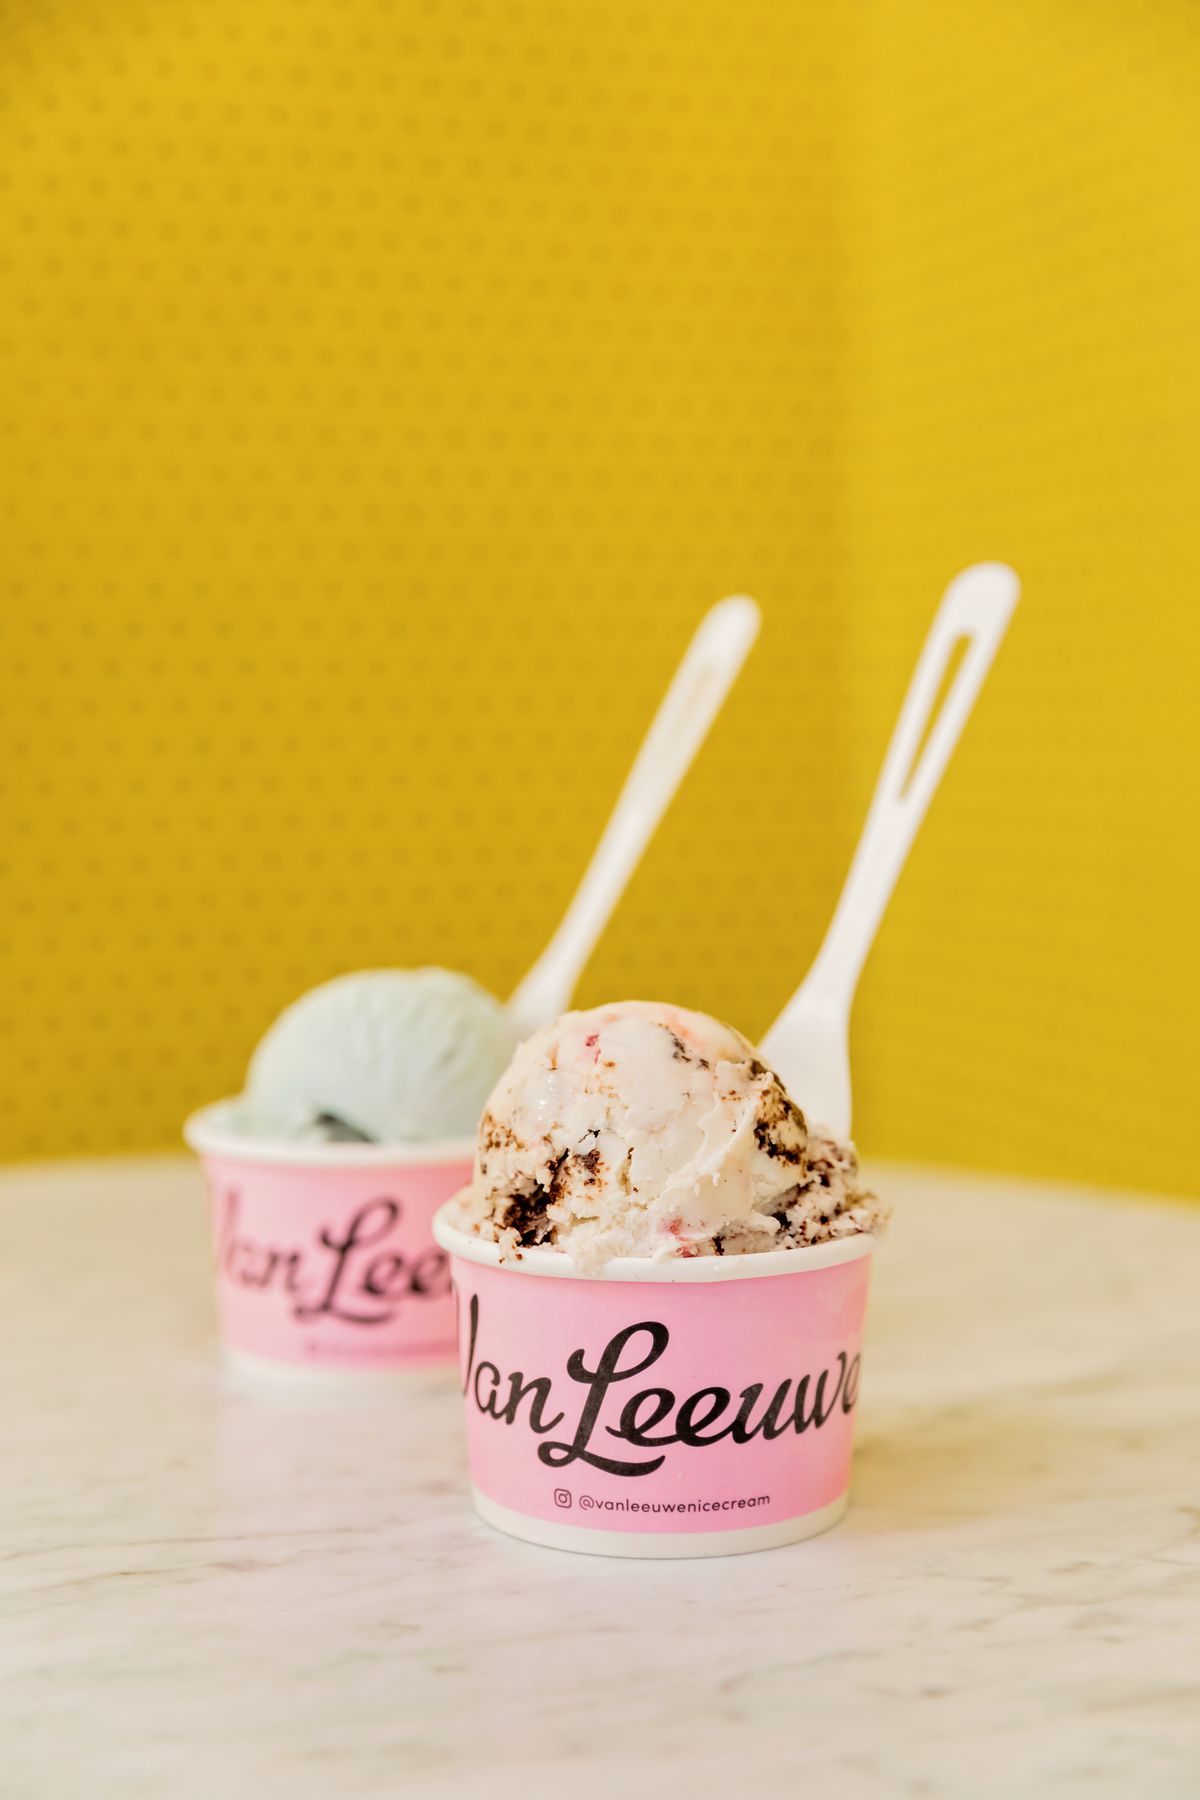 Two cups of Van Leeuwen ice cream sit in pink cups with the company logo on them. The flavors appear to be vanilla with stripes of chocolate and strawberry and mint. In the background is a yellow tile wall. The ice cream sits on a white marble counter with grey veins. 